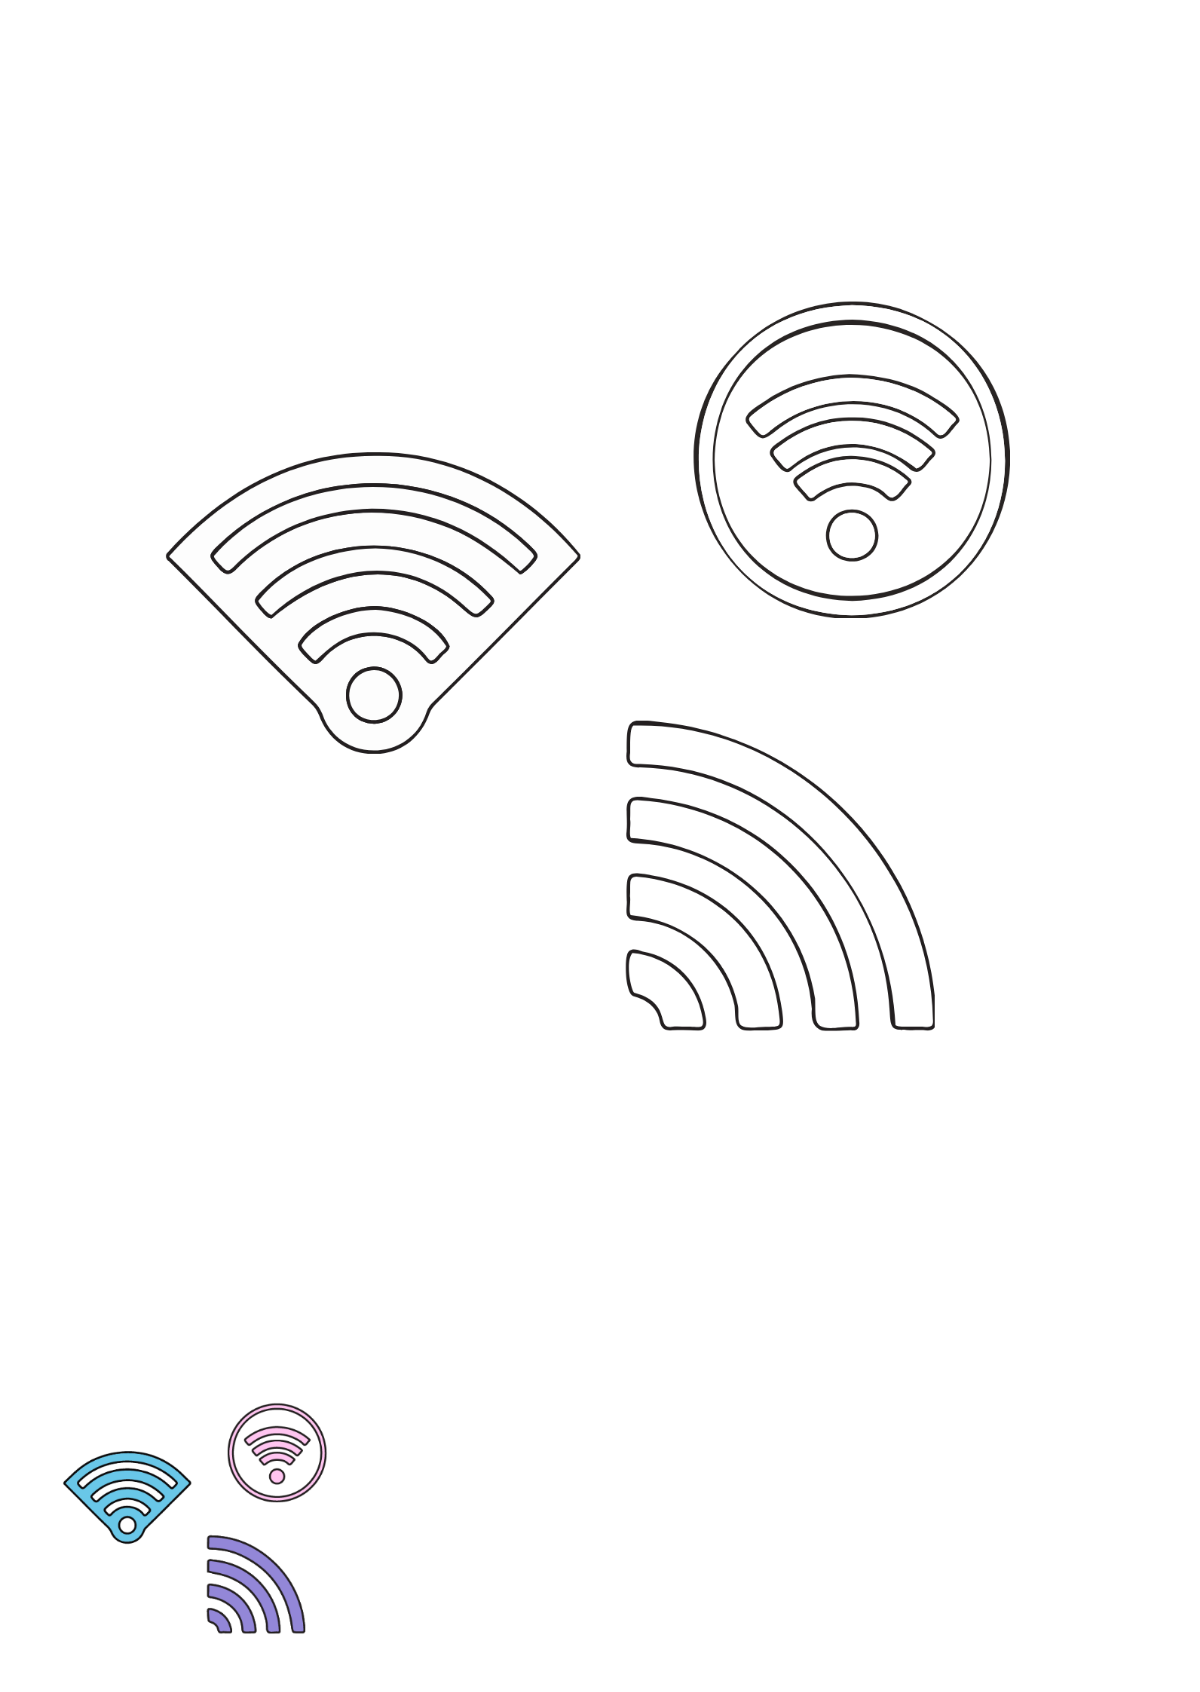 Wifi Waves coloring page